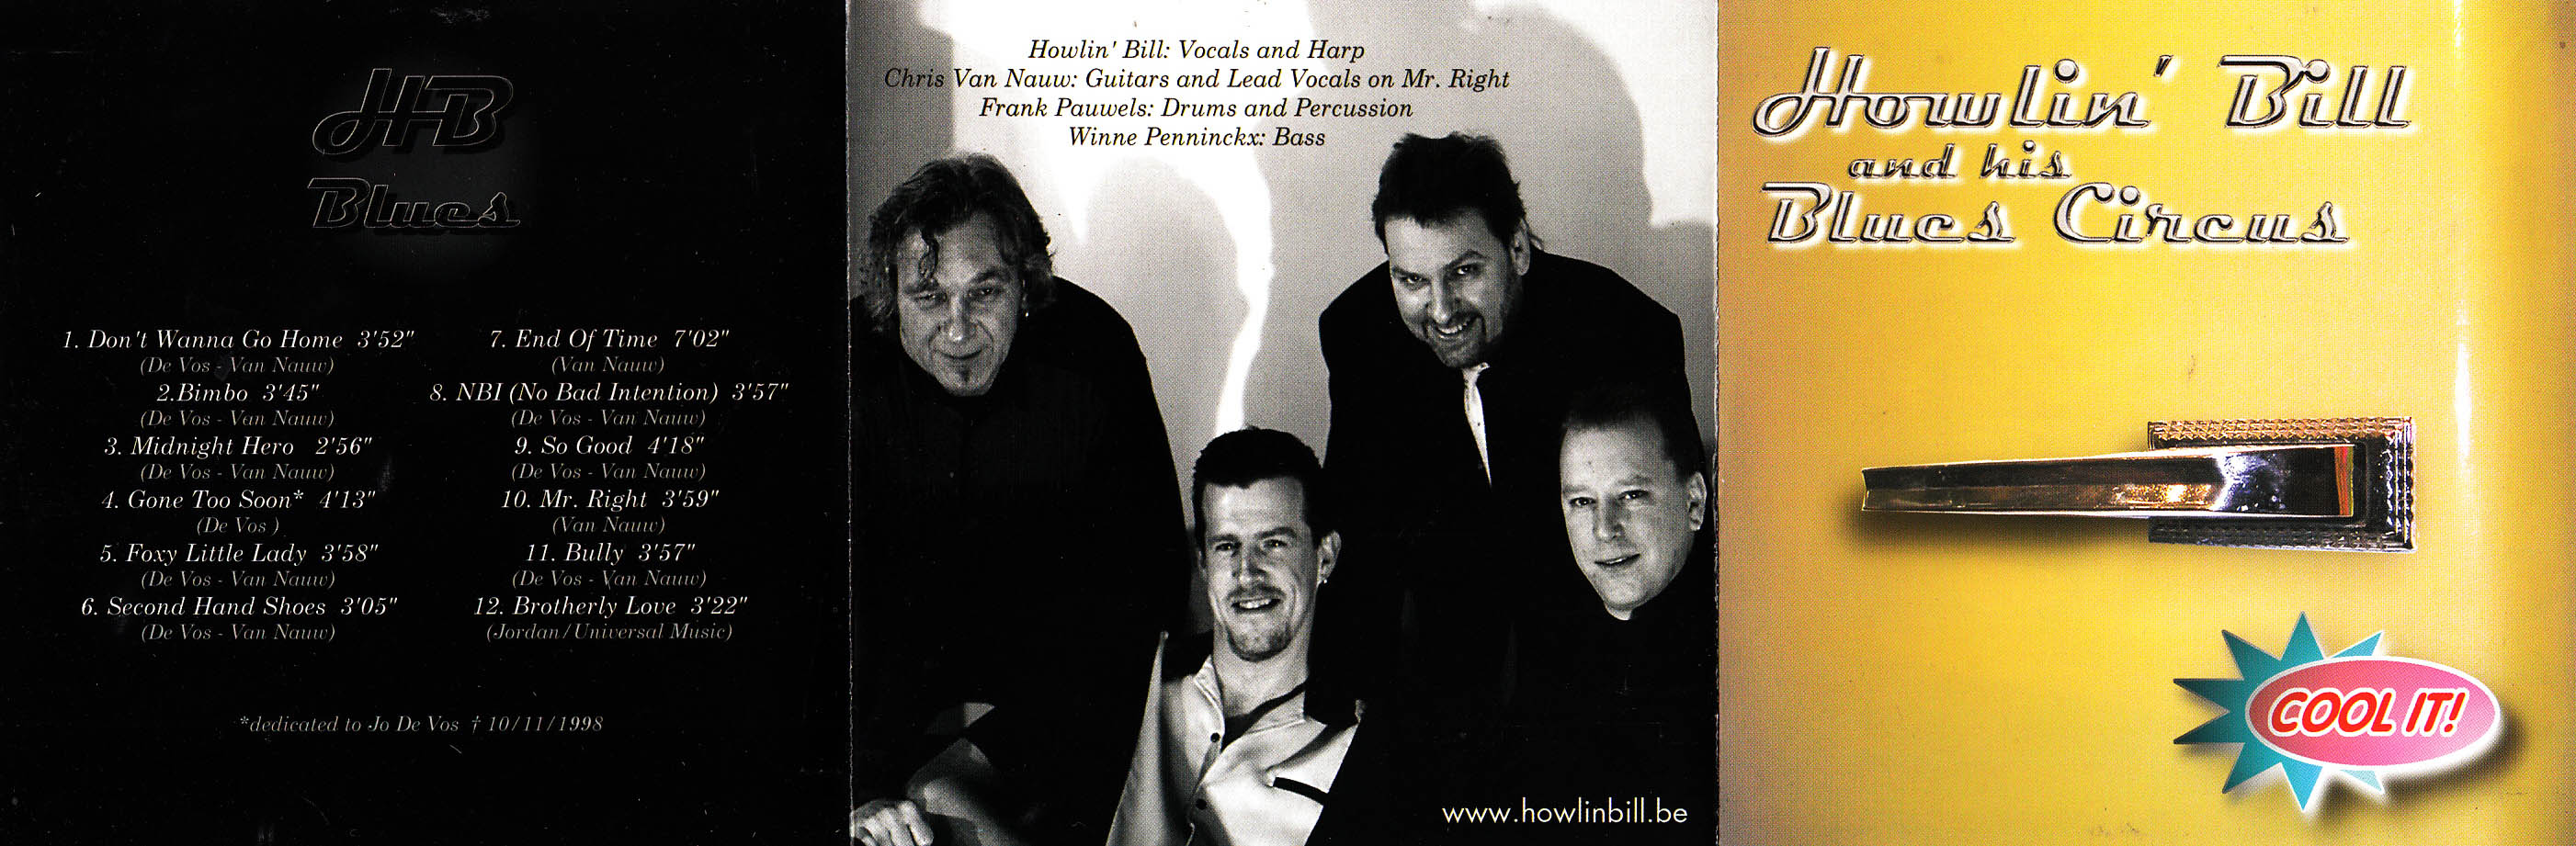 Howlin' Bill And His Blues Circus - 2004 - Cool It!